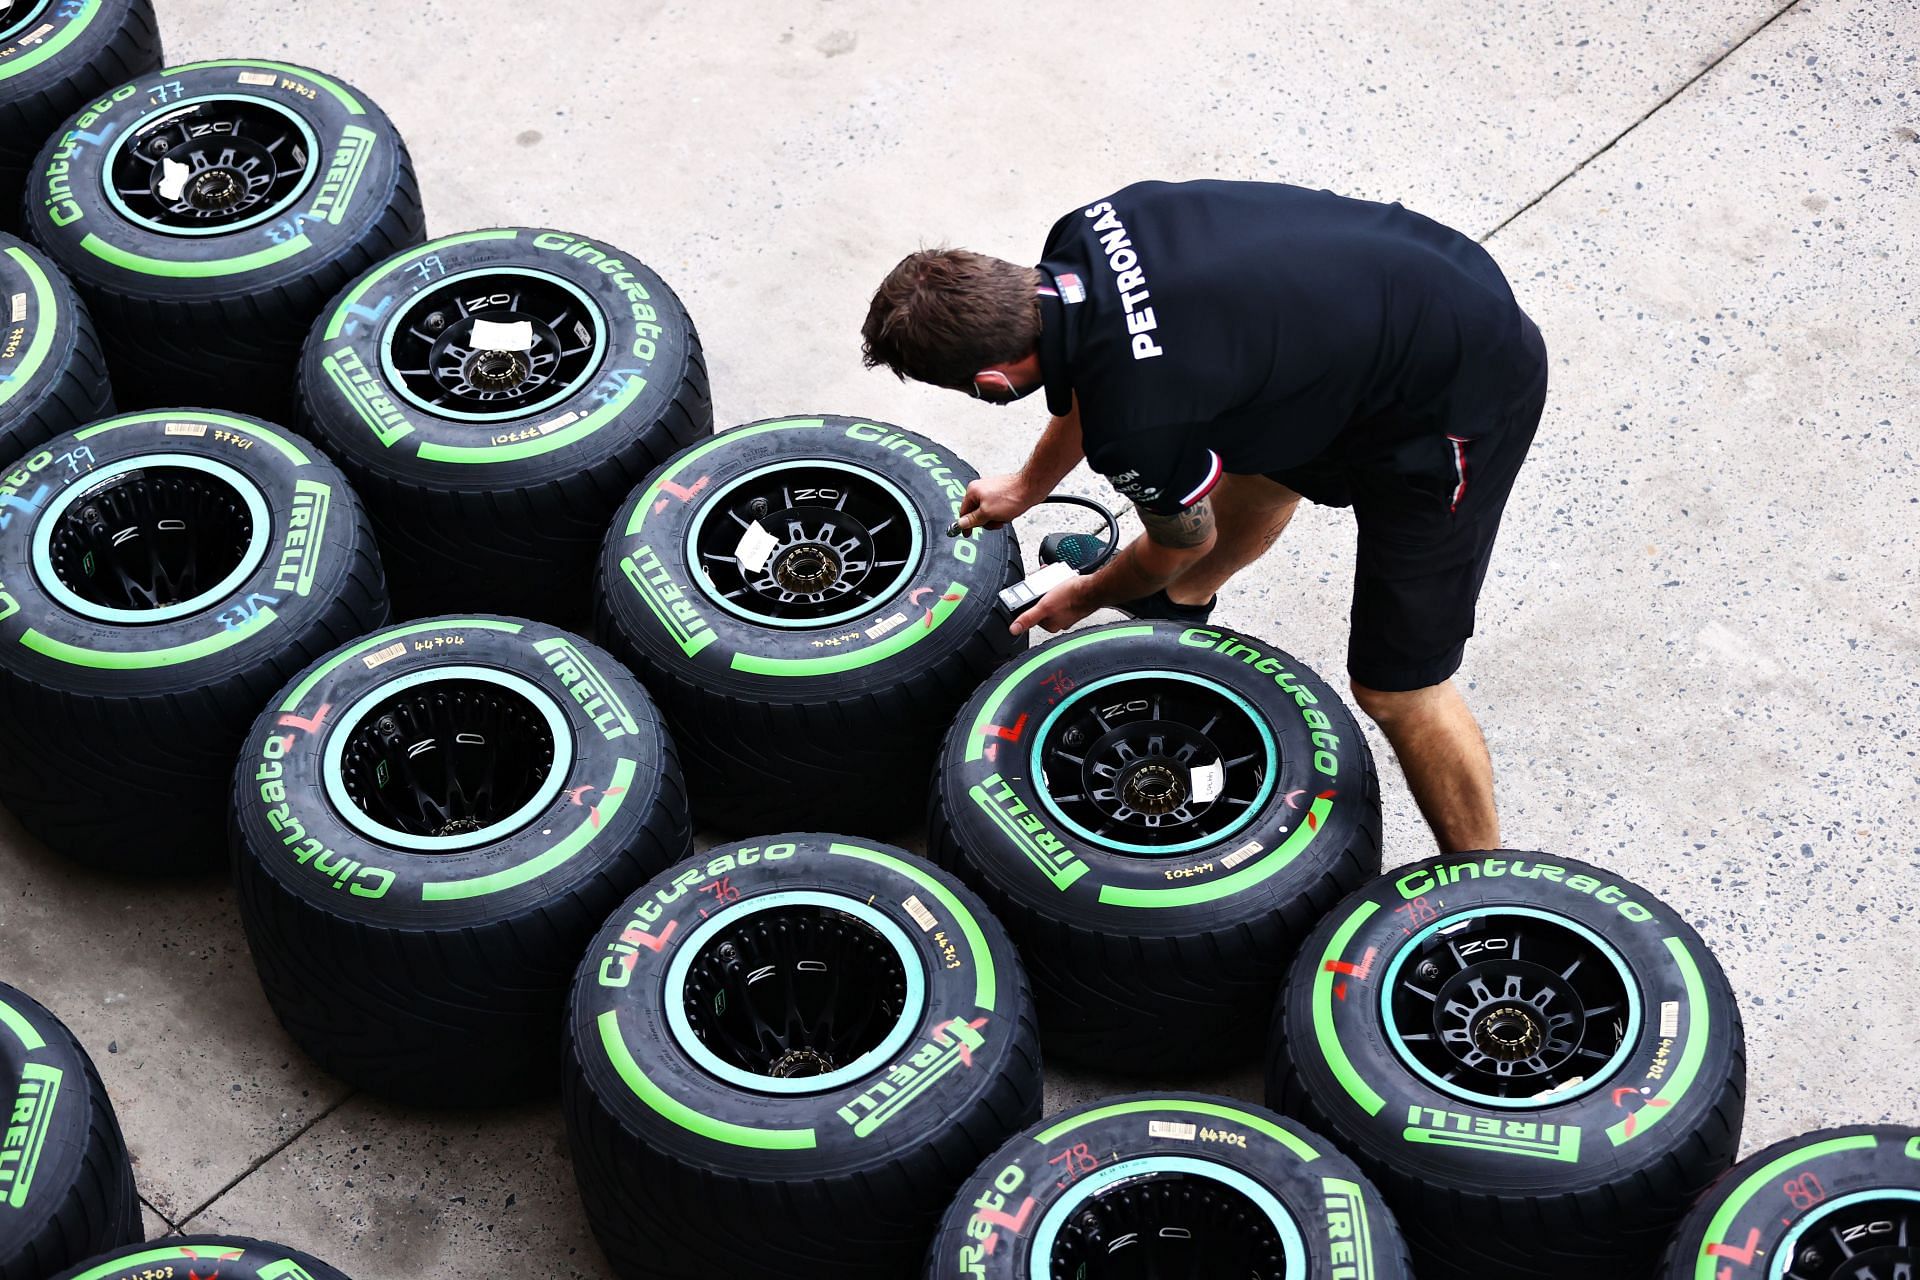 F1 tires being worked on before the 2021 Sau Paulo Grand Prix (Photo by Buda Mendes/Getty Images)